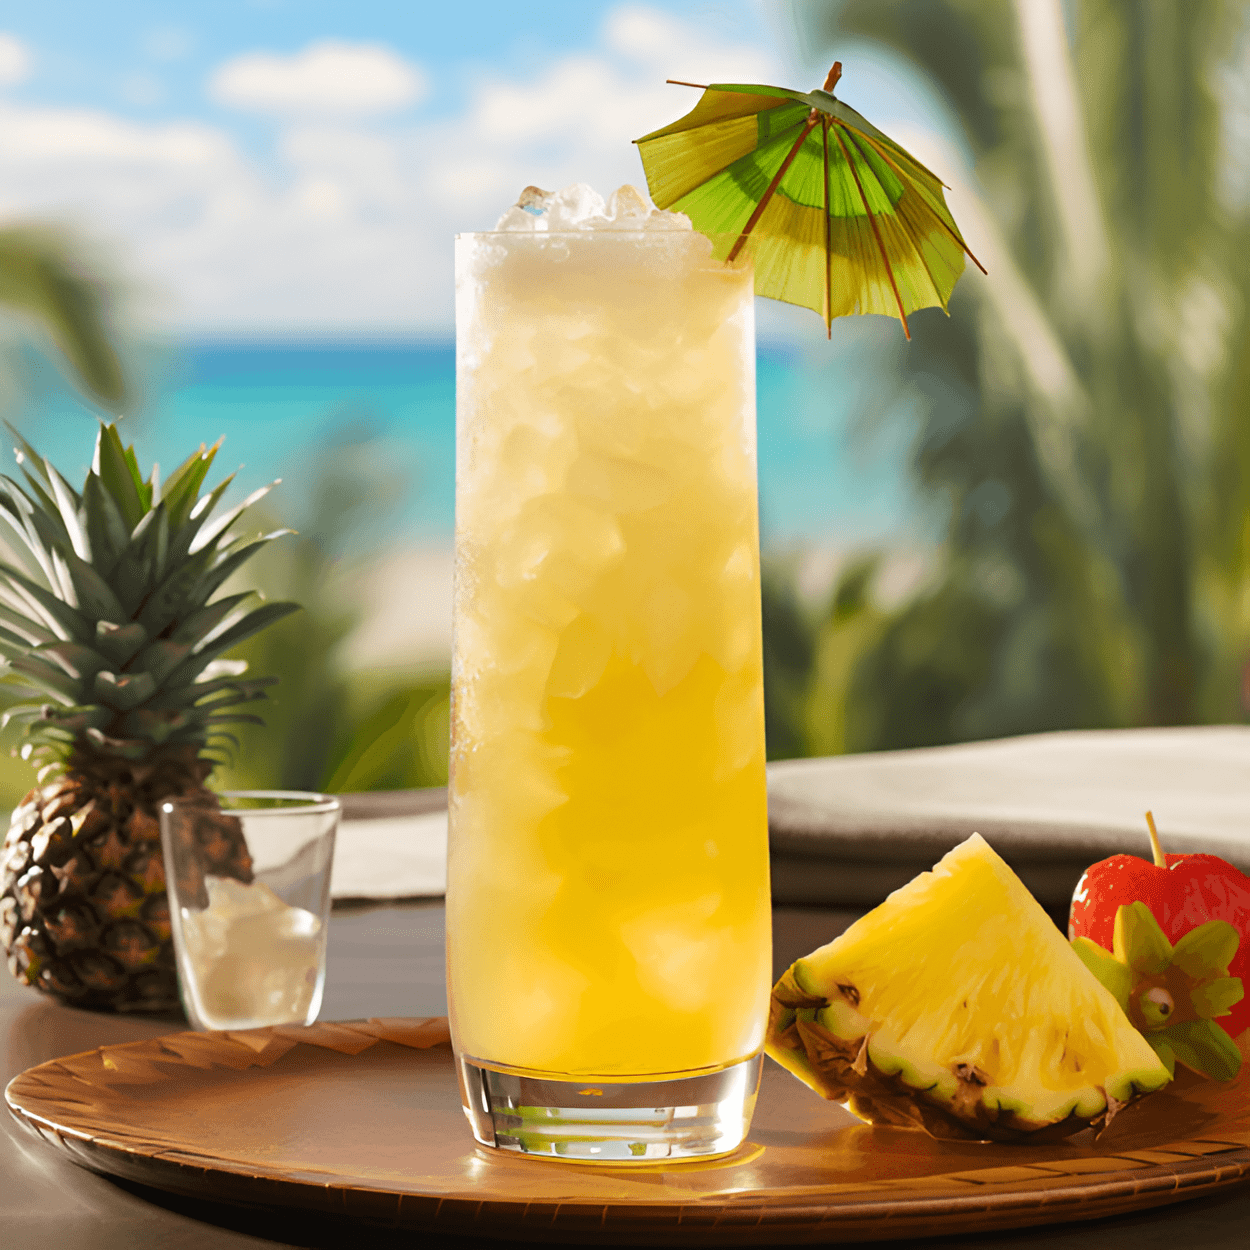 Sunny Day Cocktail Recipe - The Sunny Day cocktail is a delightful blend of sweet, sour, and slightly spicy flavors. The sweetness of the pineapple juice is balanced by the tartness of the lime, while the spiciness of the ginger beer adds an exciting kick. The rum adds a subtle warmth that rounds out the flavors beautifully.